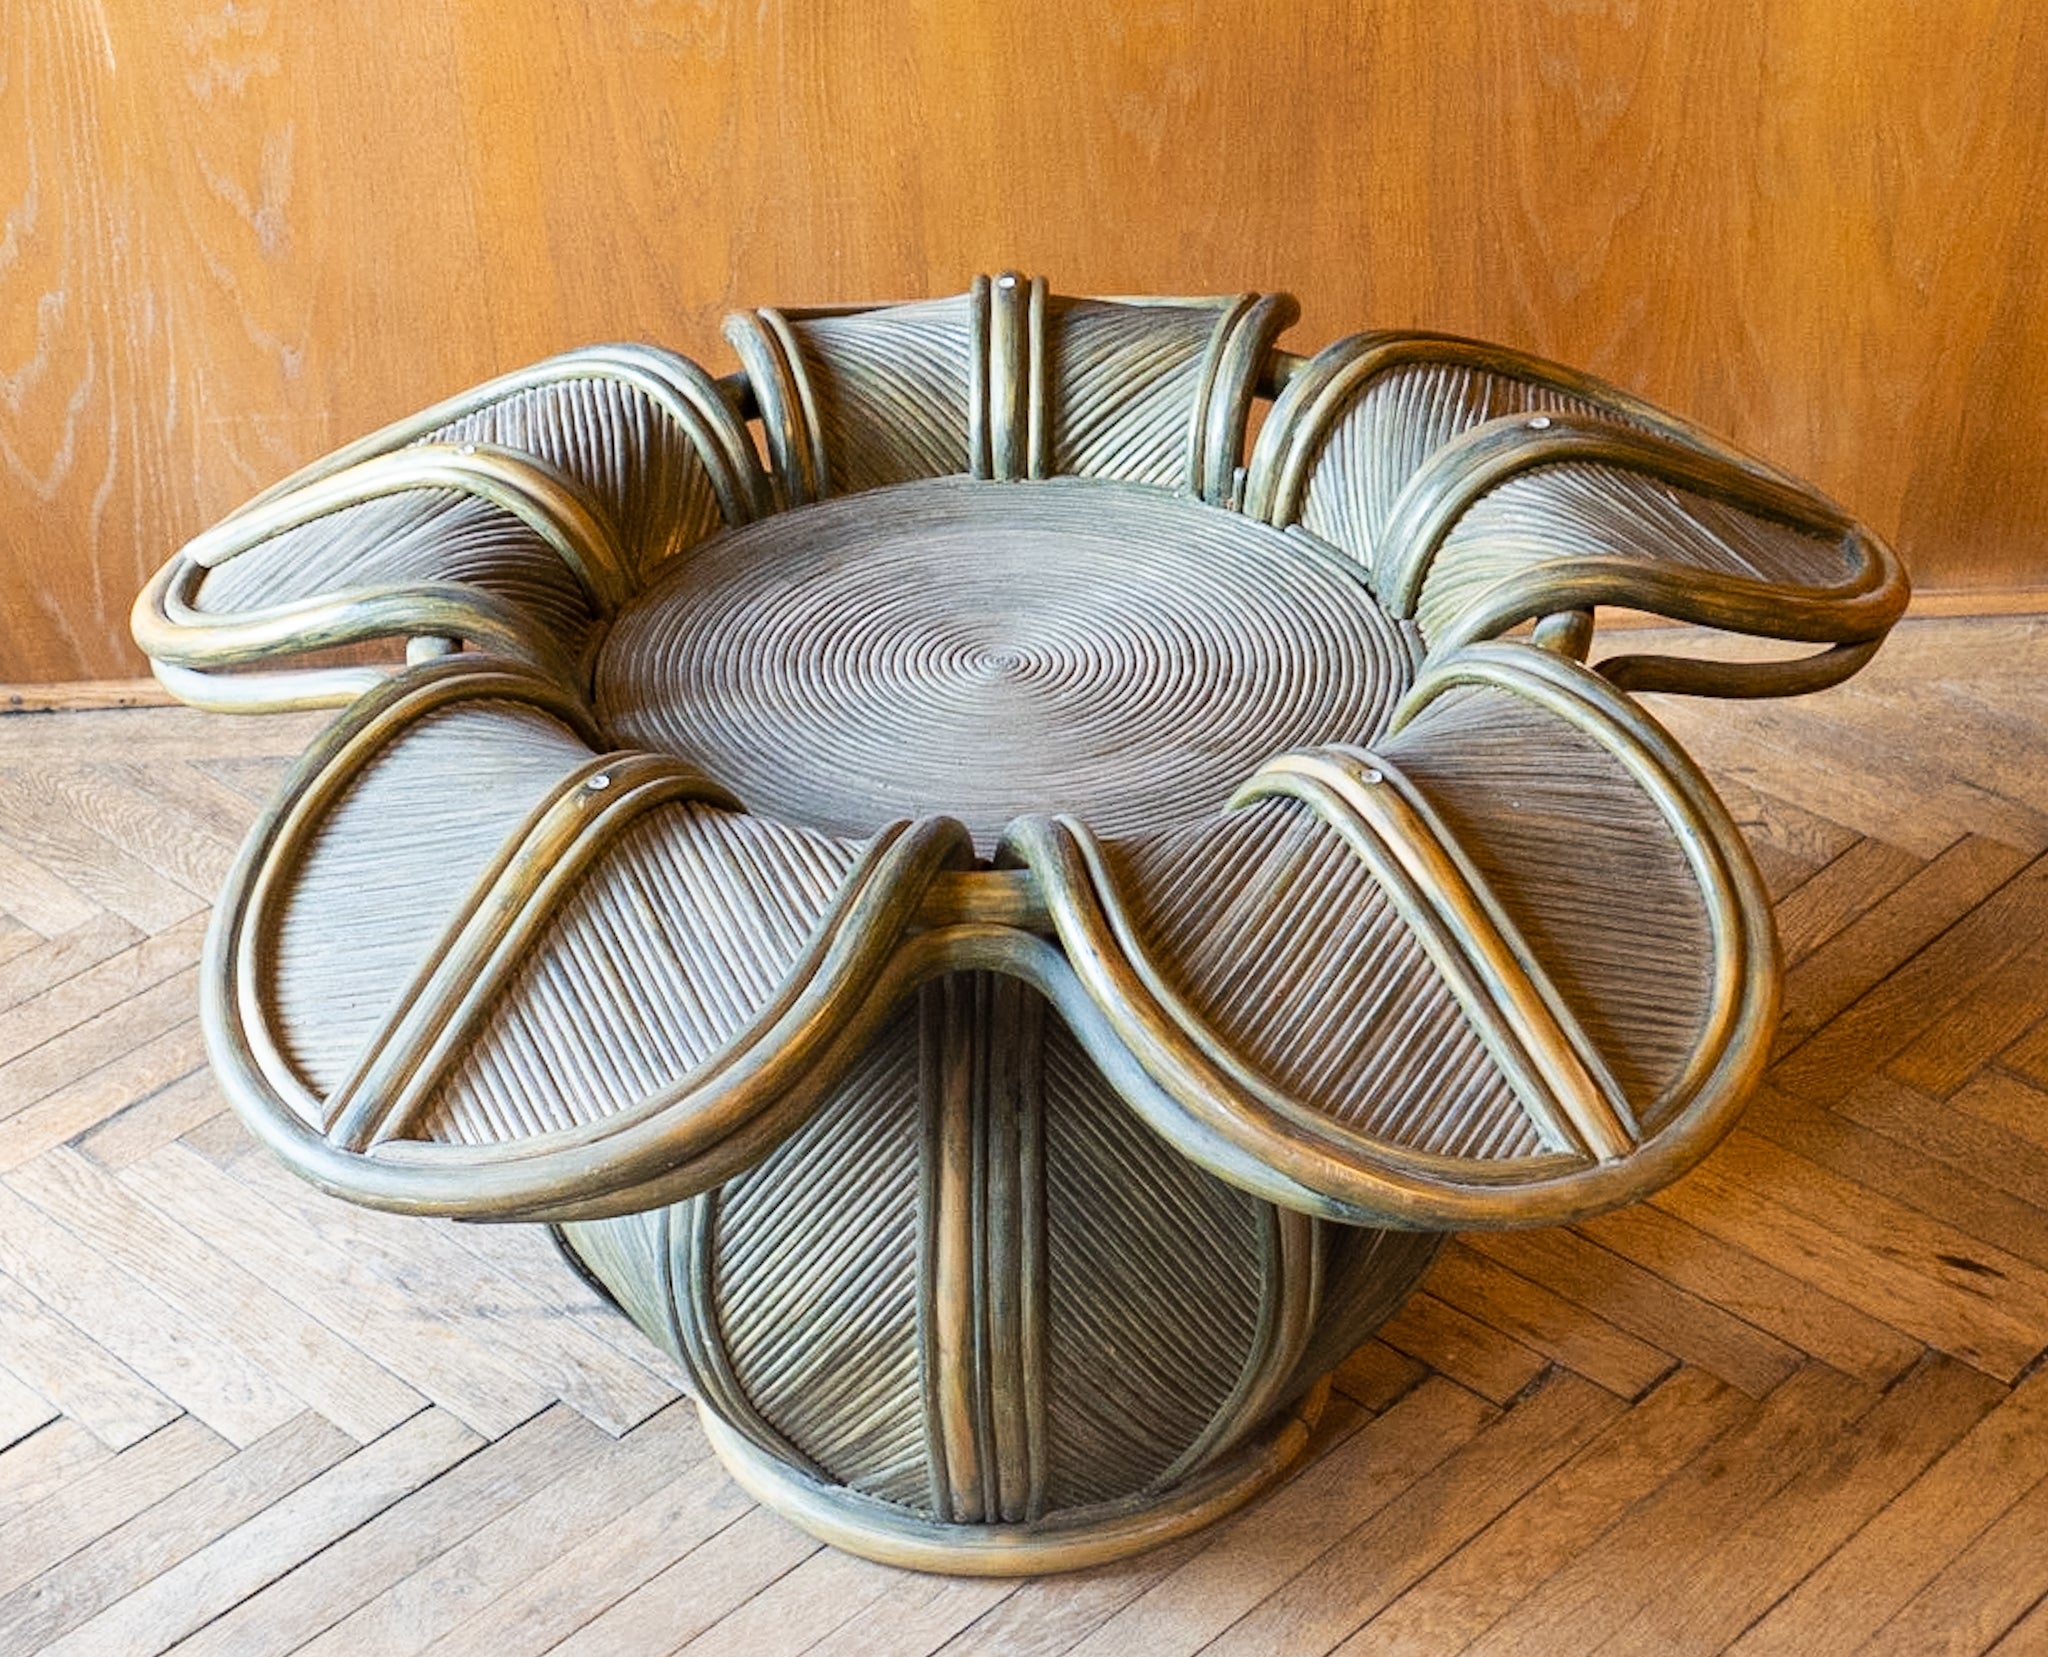 Mid-Century Modern pencil reed or rattan bell flower coffee table, Italy 70s.

Very beautiful and rare Italian light green coffee table in pencil reed or rattan in the shape of a bell flower with a black glass table top. This coffee table with its